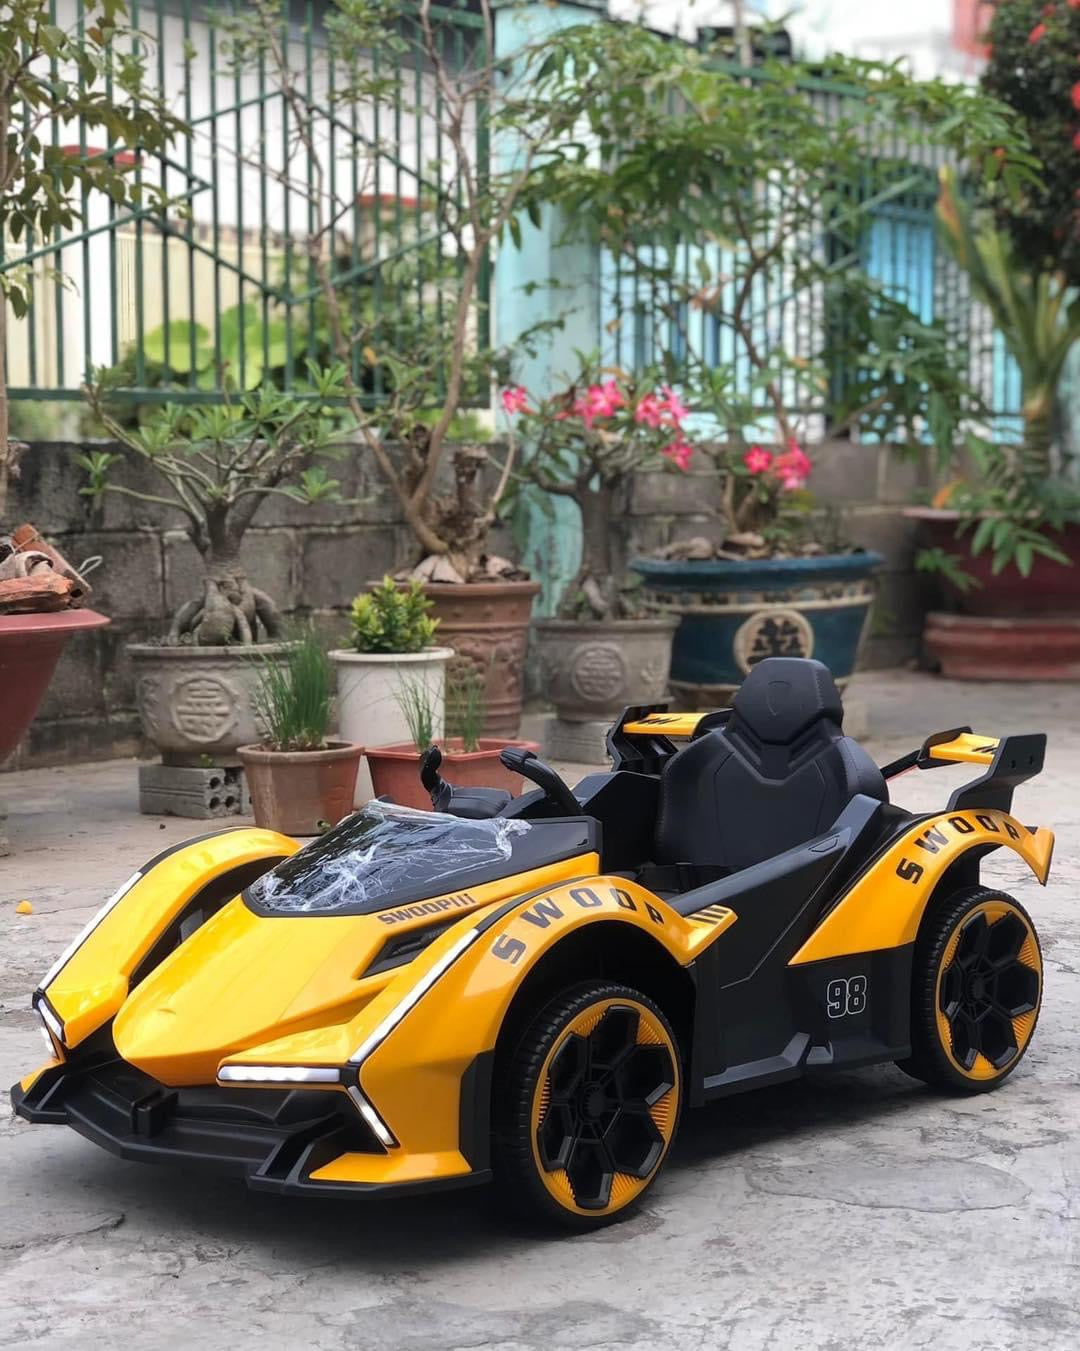 New F-1 Electric Sports Car GM 188 For 1-8 Years Old Kids With Parental Remote | sams toy Ahmedabad